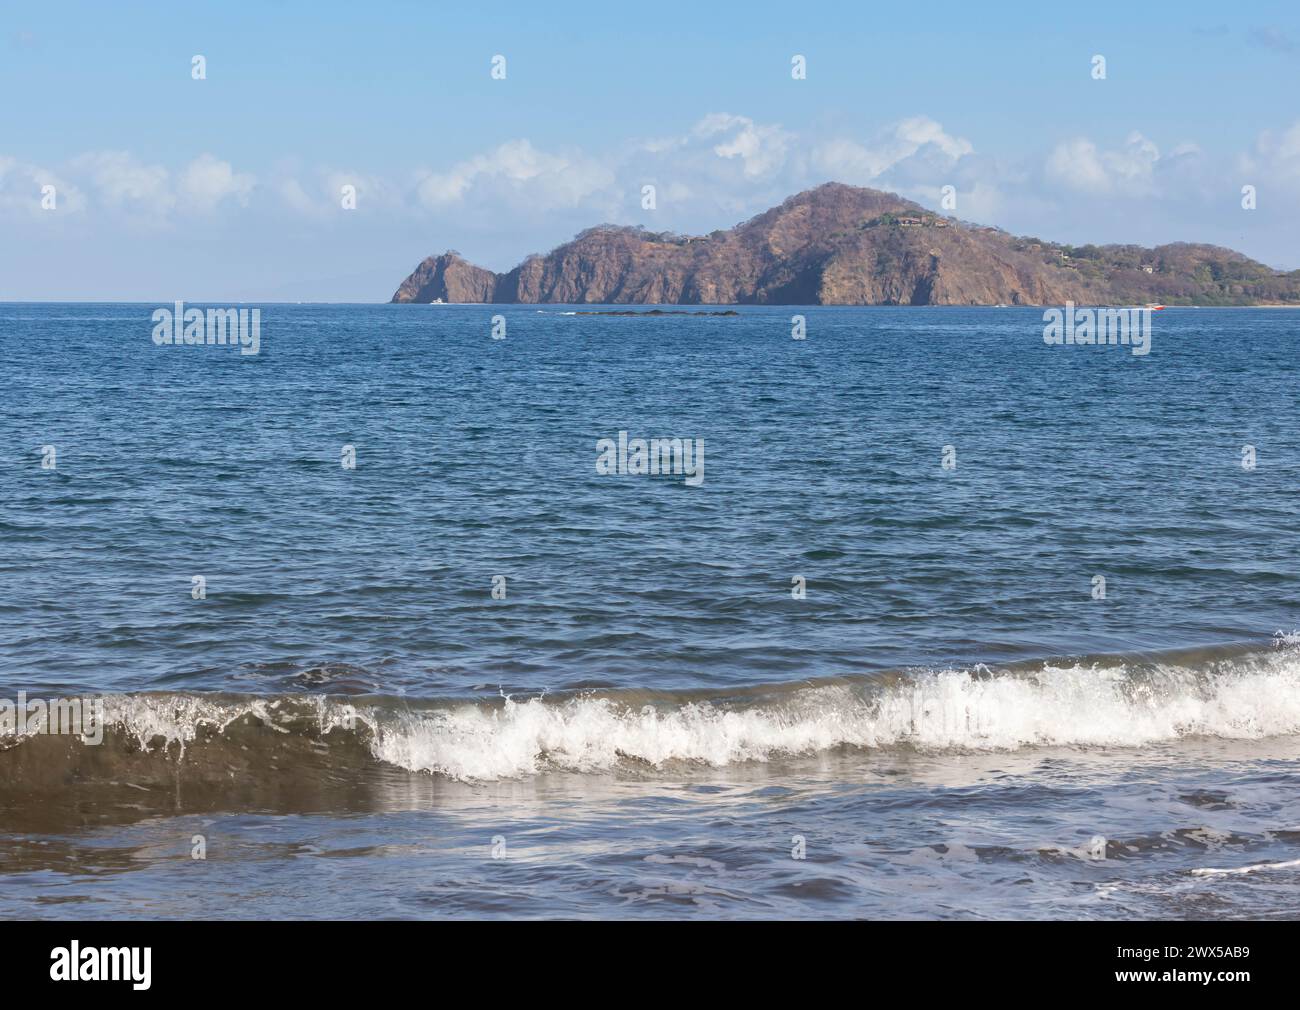 Wave near the beach and island in the distance in Playa Hermosa Costa Rica Stock Photo